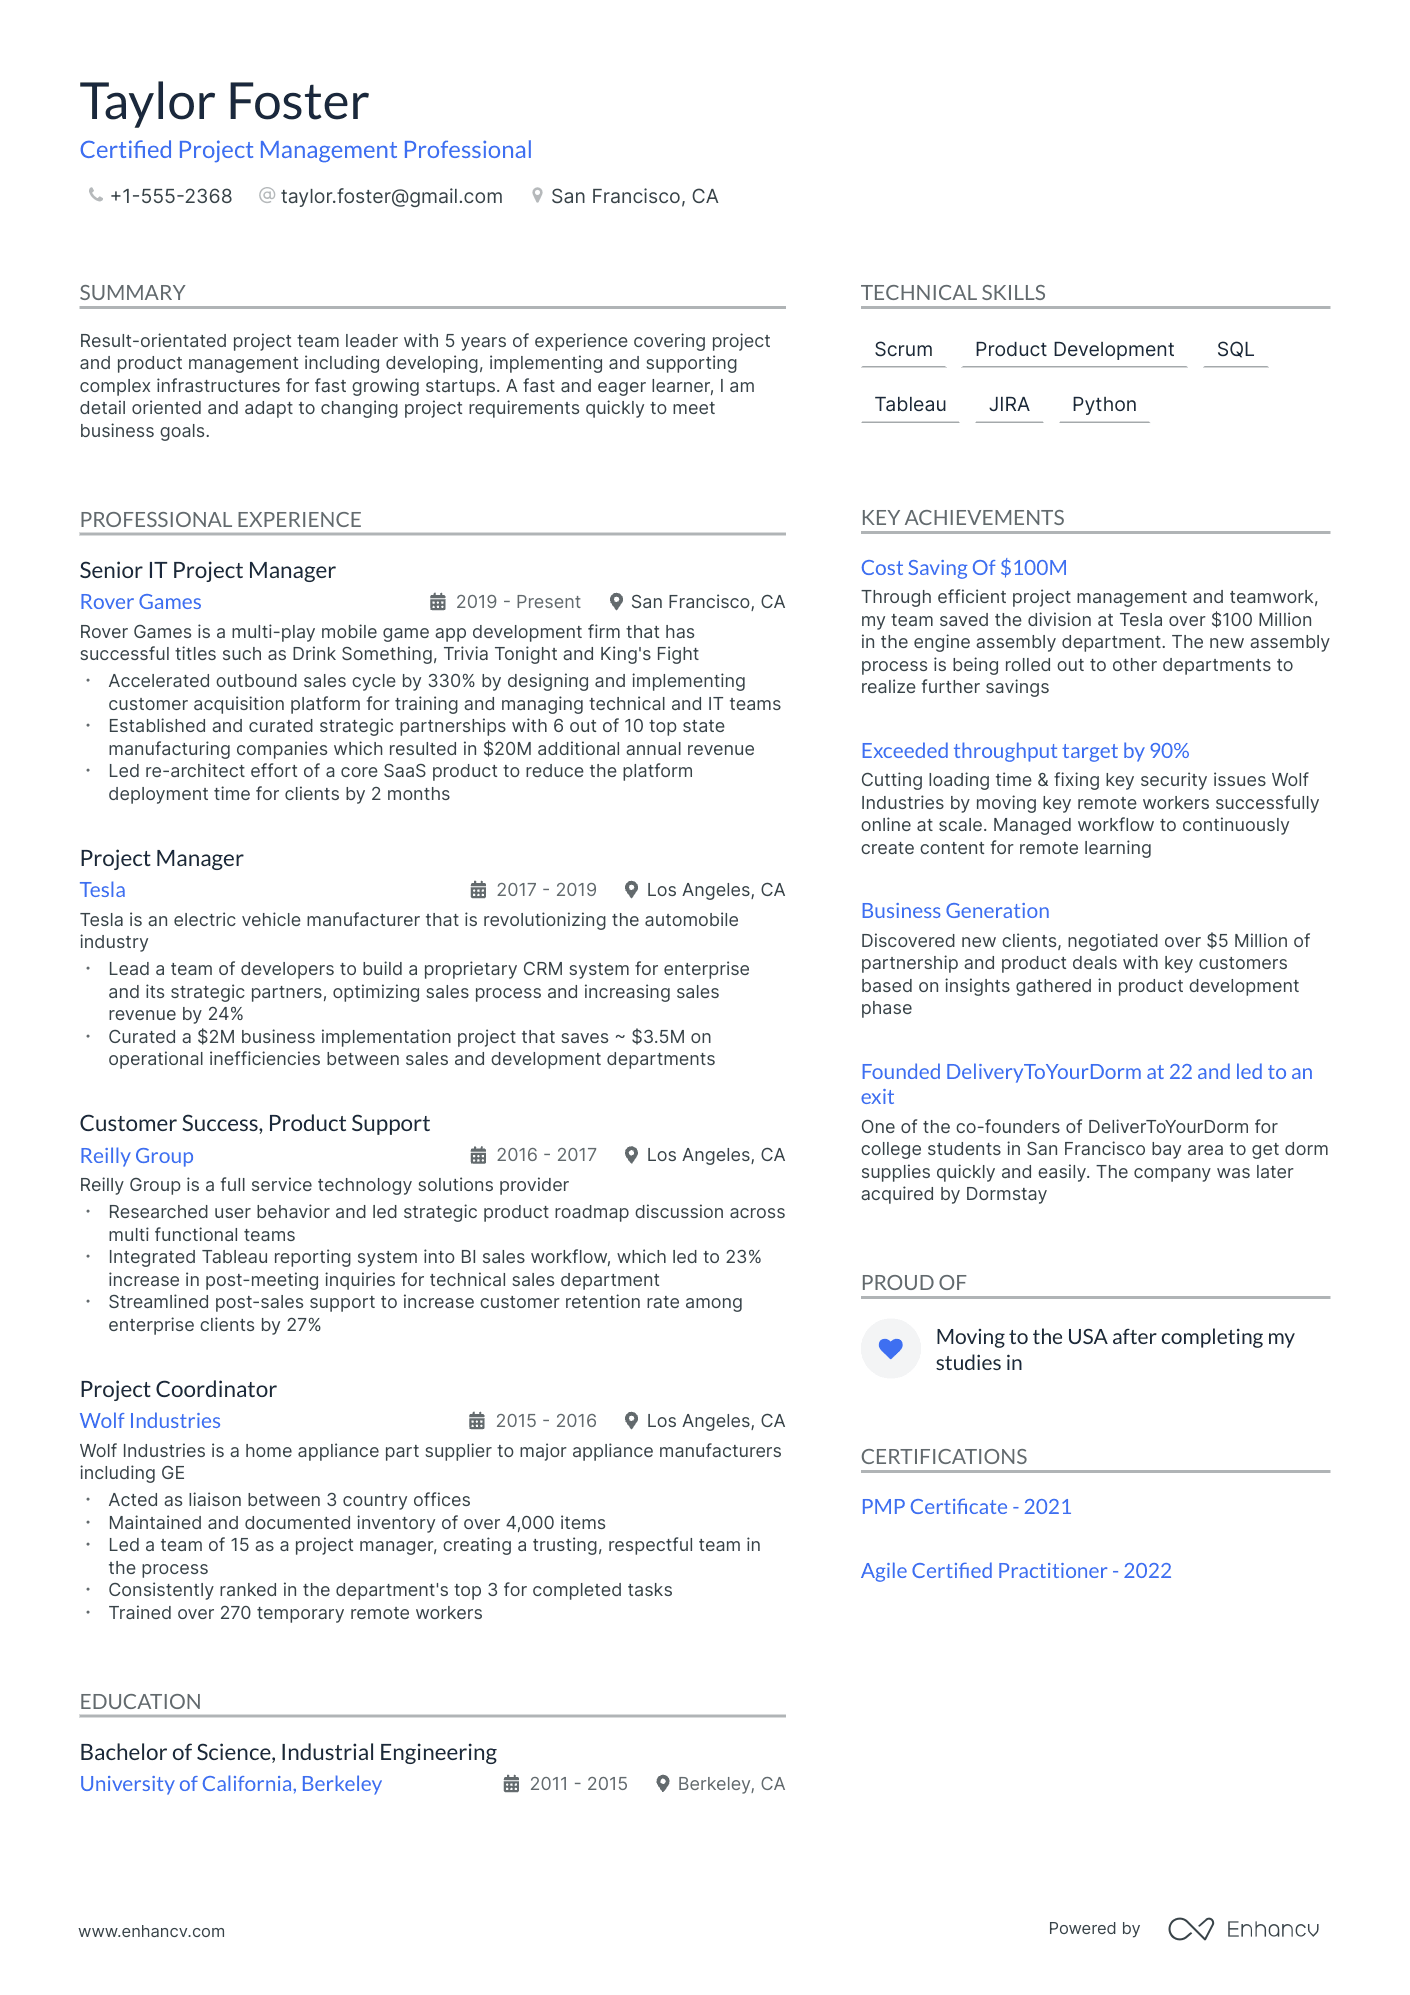 Project Manager resume example